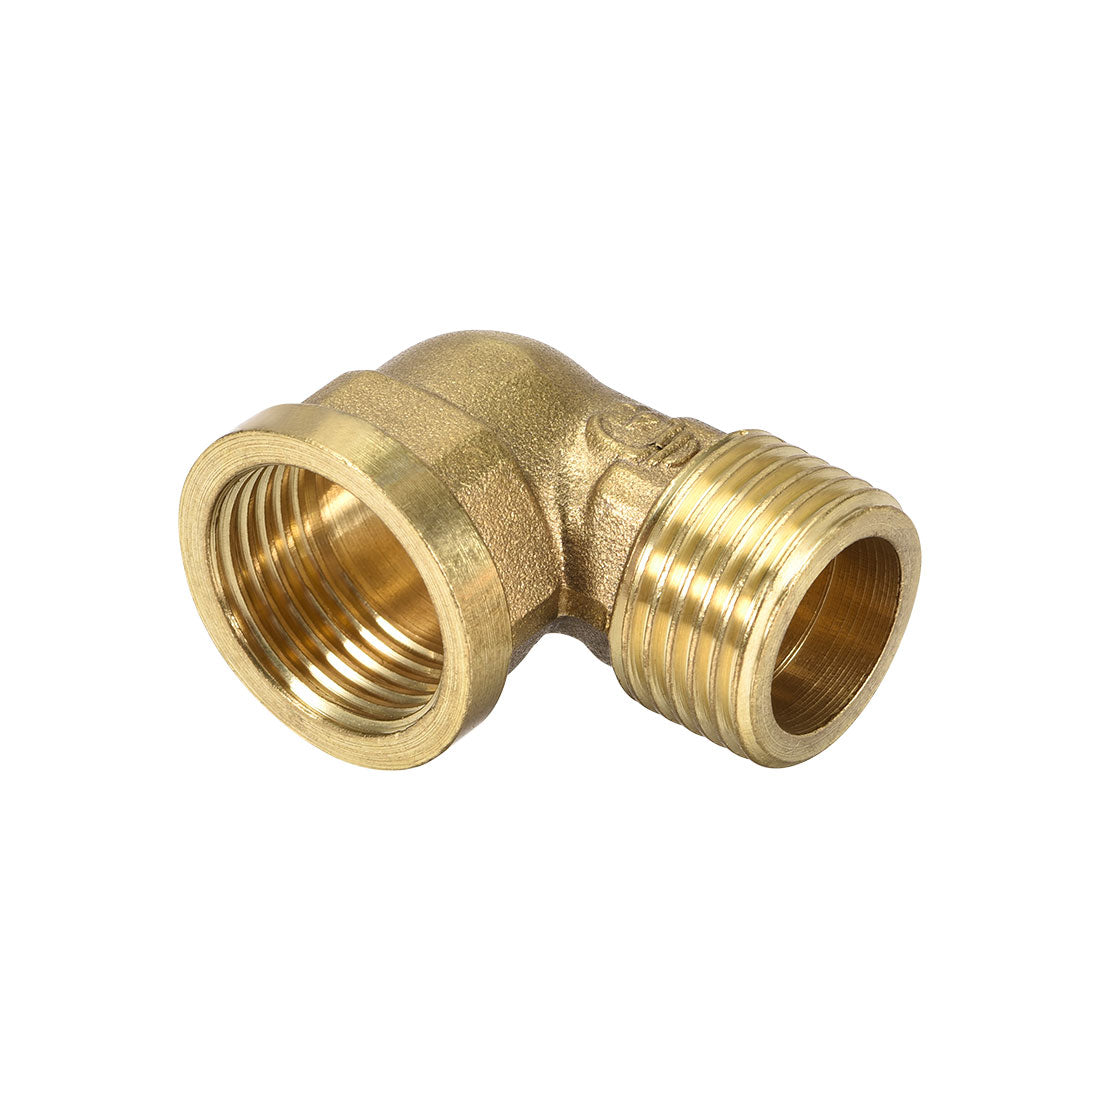 uxcell Uxcell Brass Pipe Fitting 90 Degree Street Elbow G1/2 Male x G1/2 Female